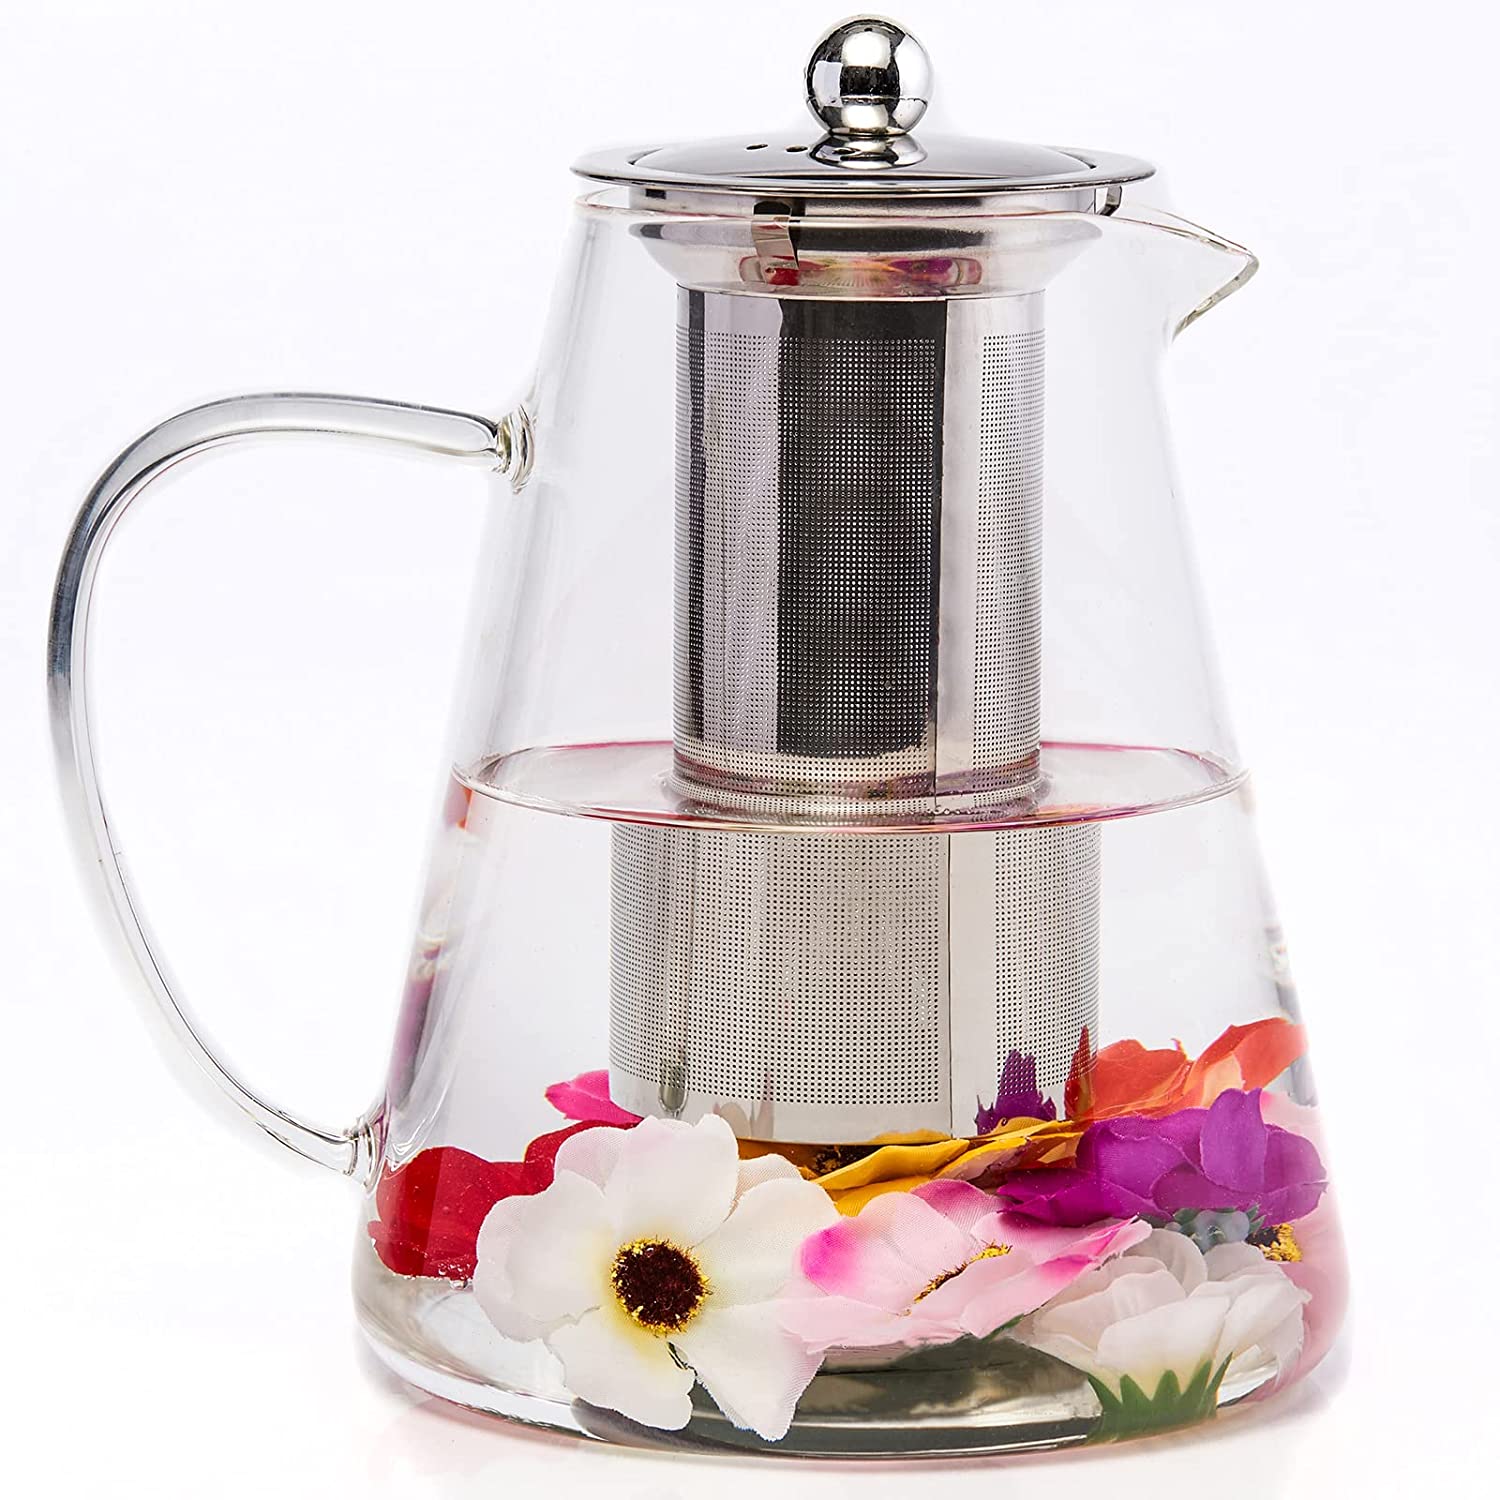 LunaGoods Handmade Glass Jug 1.6 L, Includes 304 Stainless Steel Strainer, Made of Certified Heat-Resistant Borosilicate Glass, Teapot for Optimal Tea Preparation, Developed in Germany